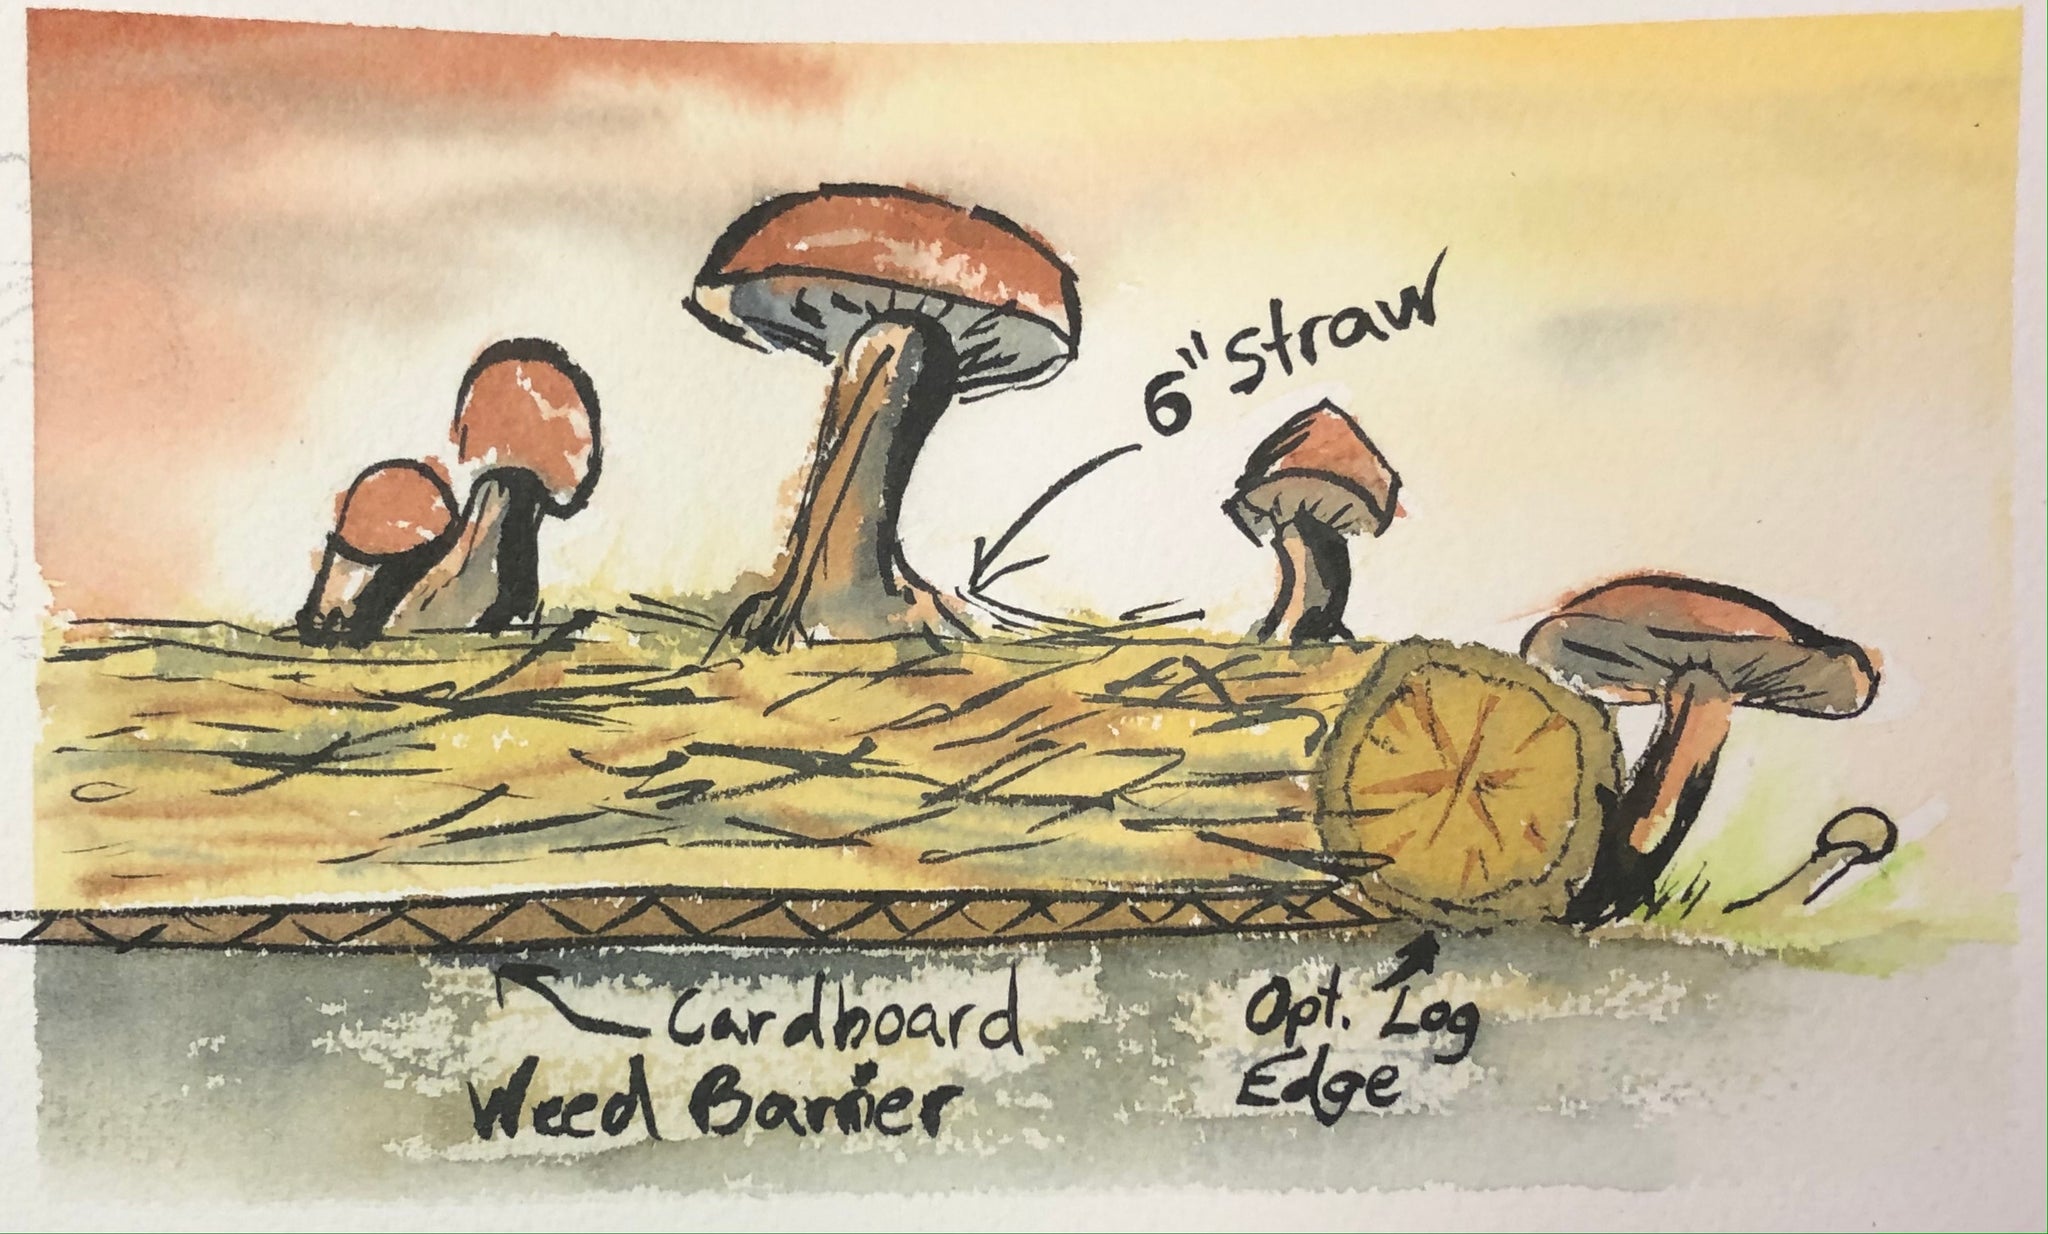 Mushroom Mastery: The Ultimate Guide to Fungi Farming Outdoors - 4+ hrs OnDemand Only